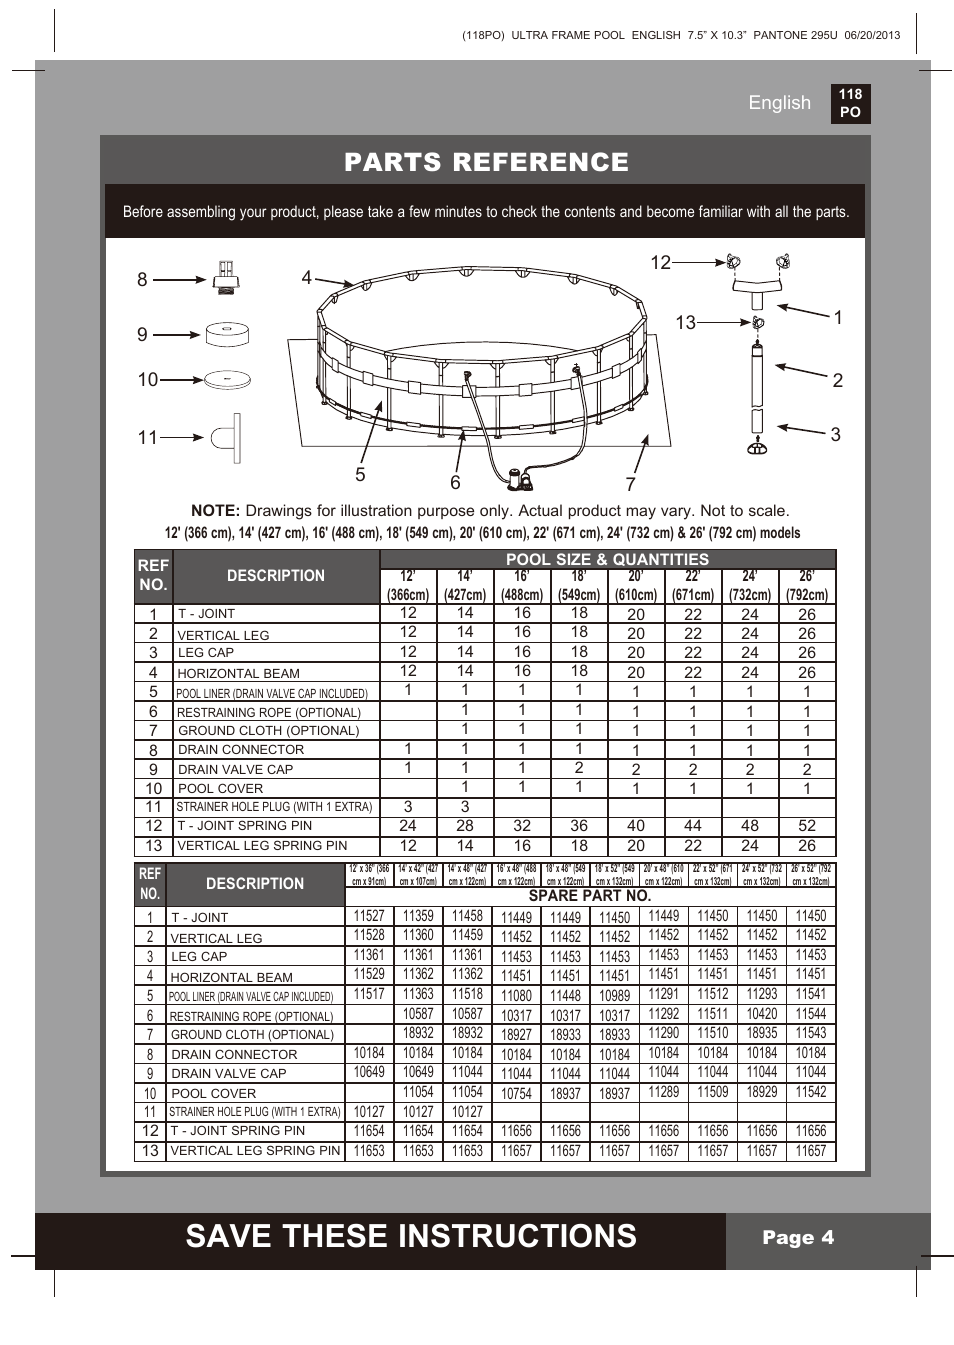 Save these instructions, Parts reference, English page 4 | Intex 18 FT